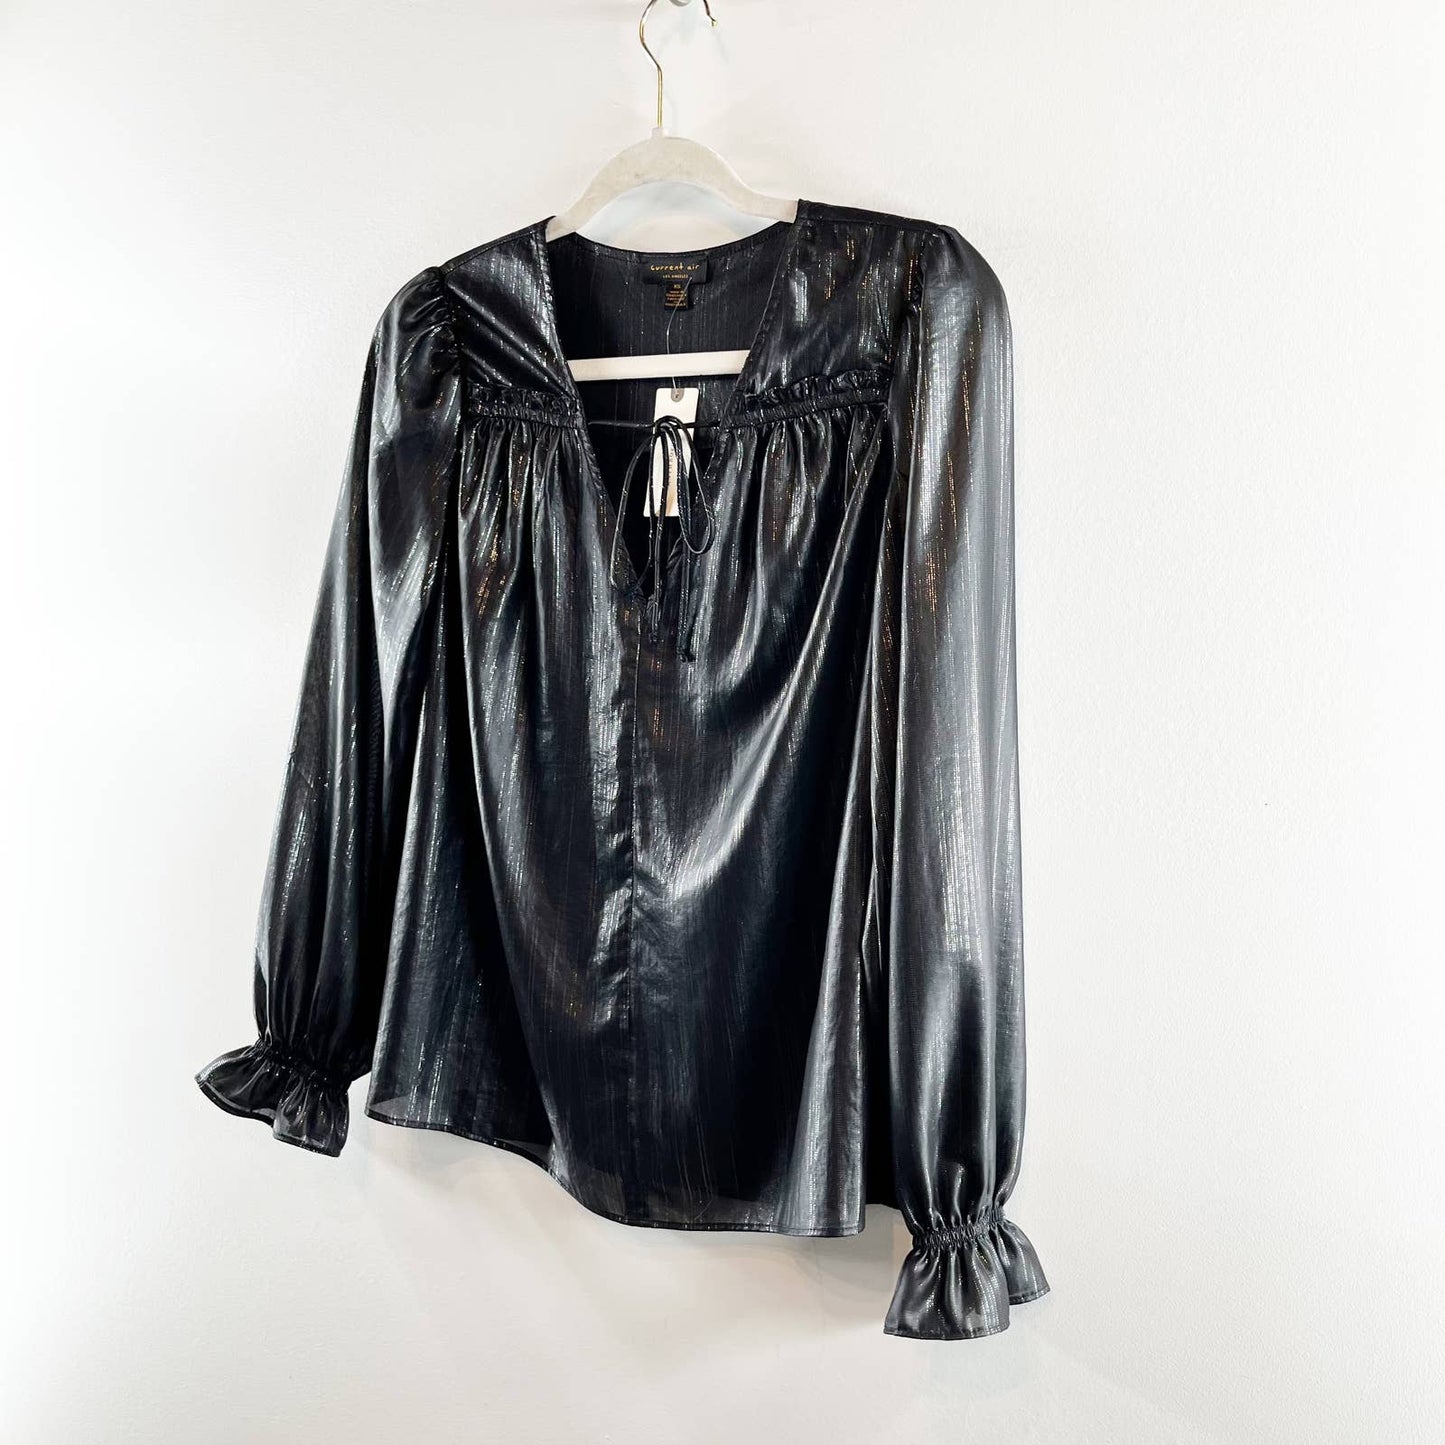 Current Air Shimmer Bristol Puffed Sleeves Spliced Neck Blouse in Black XS